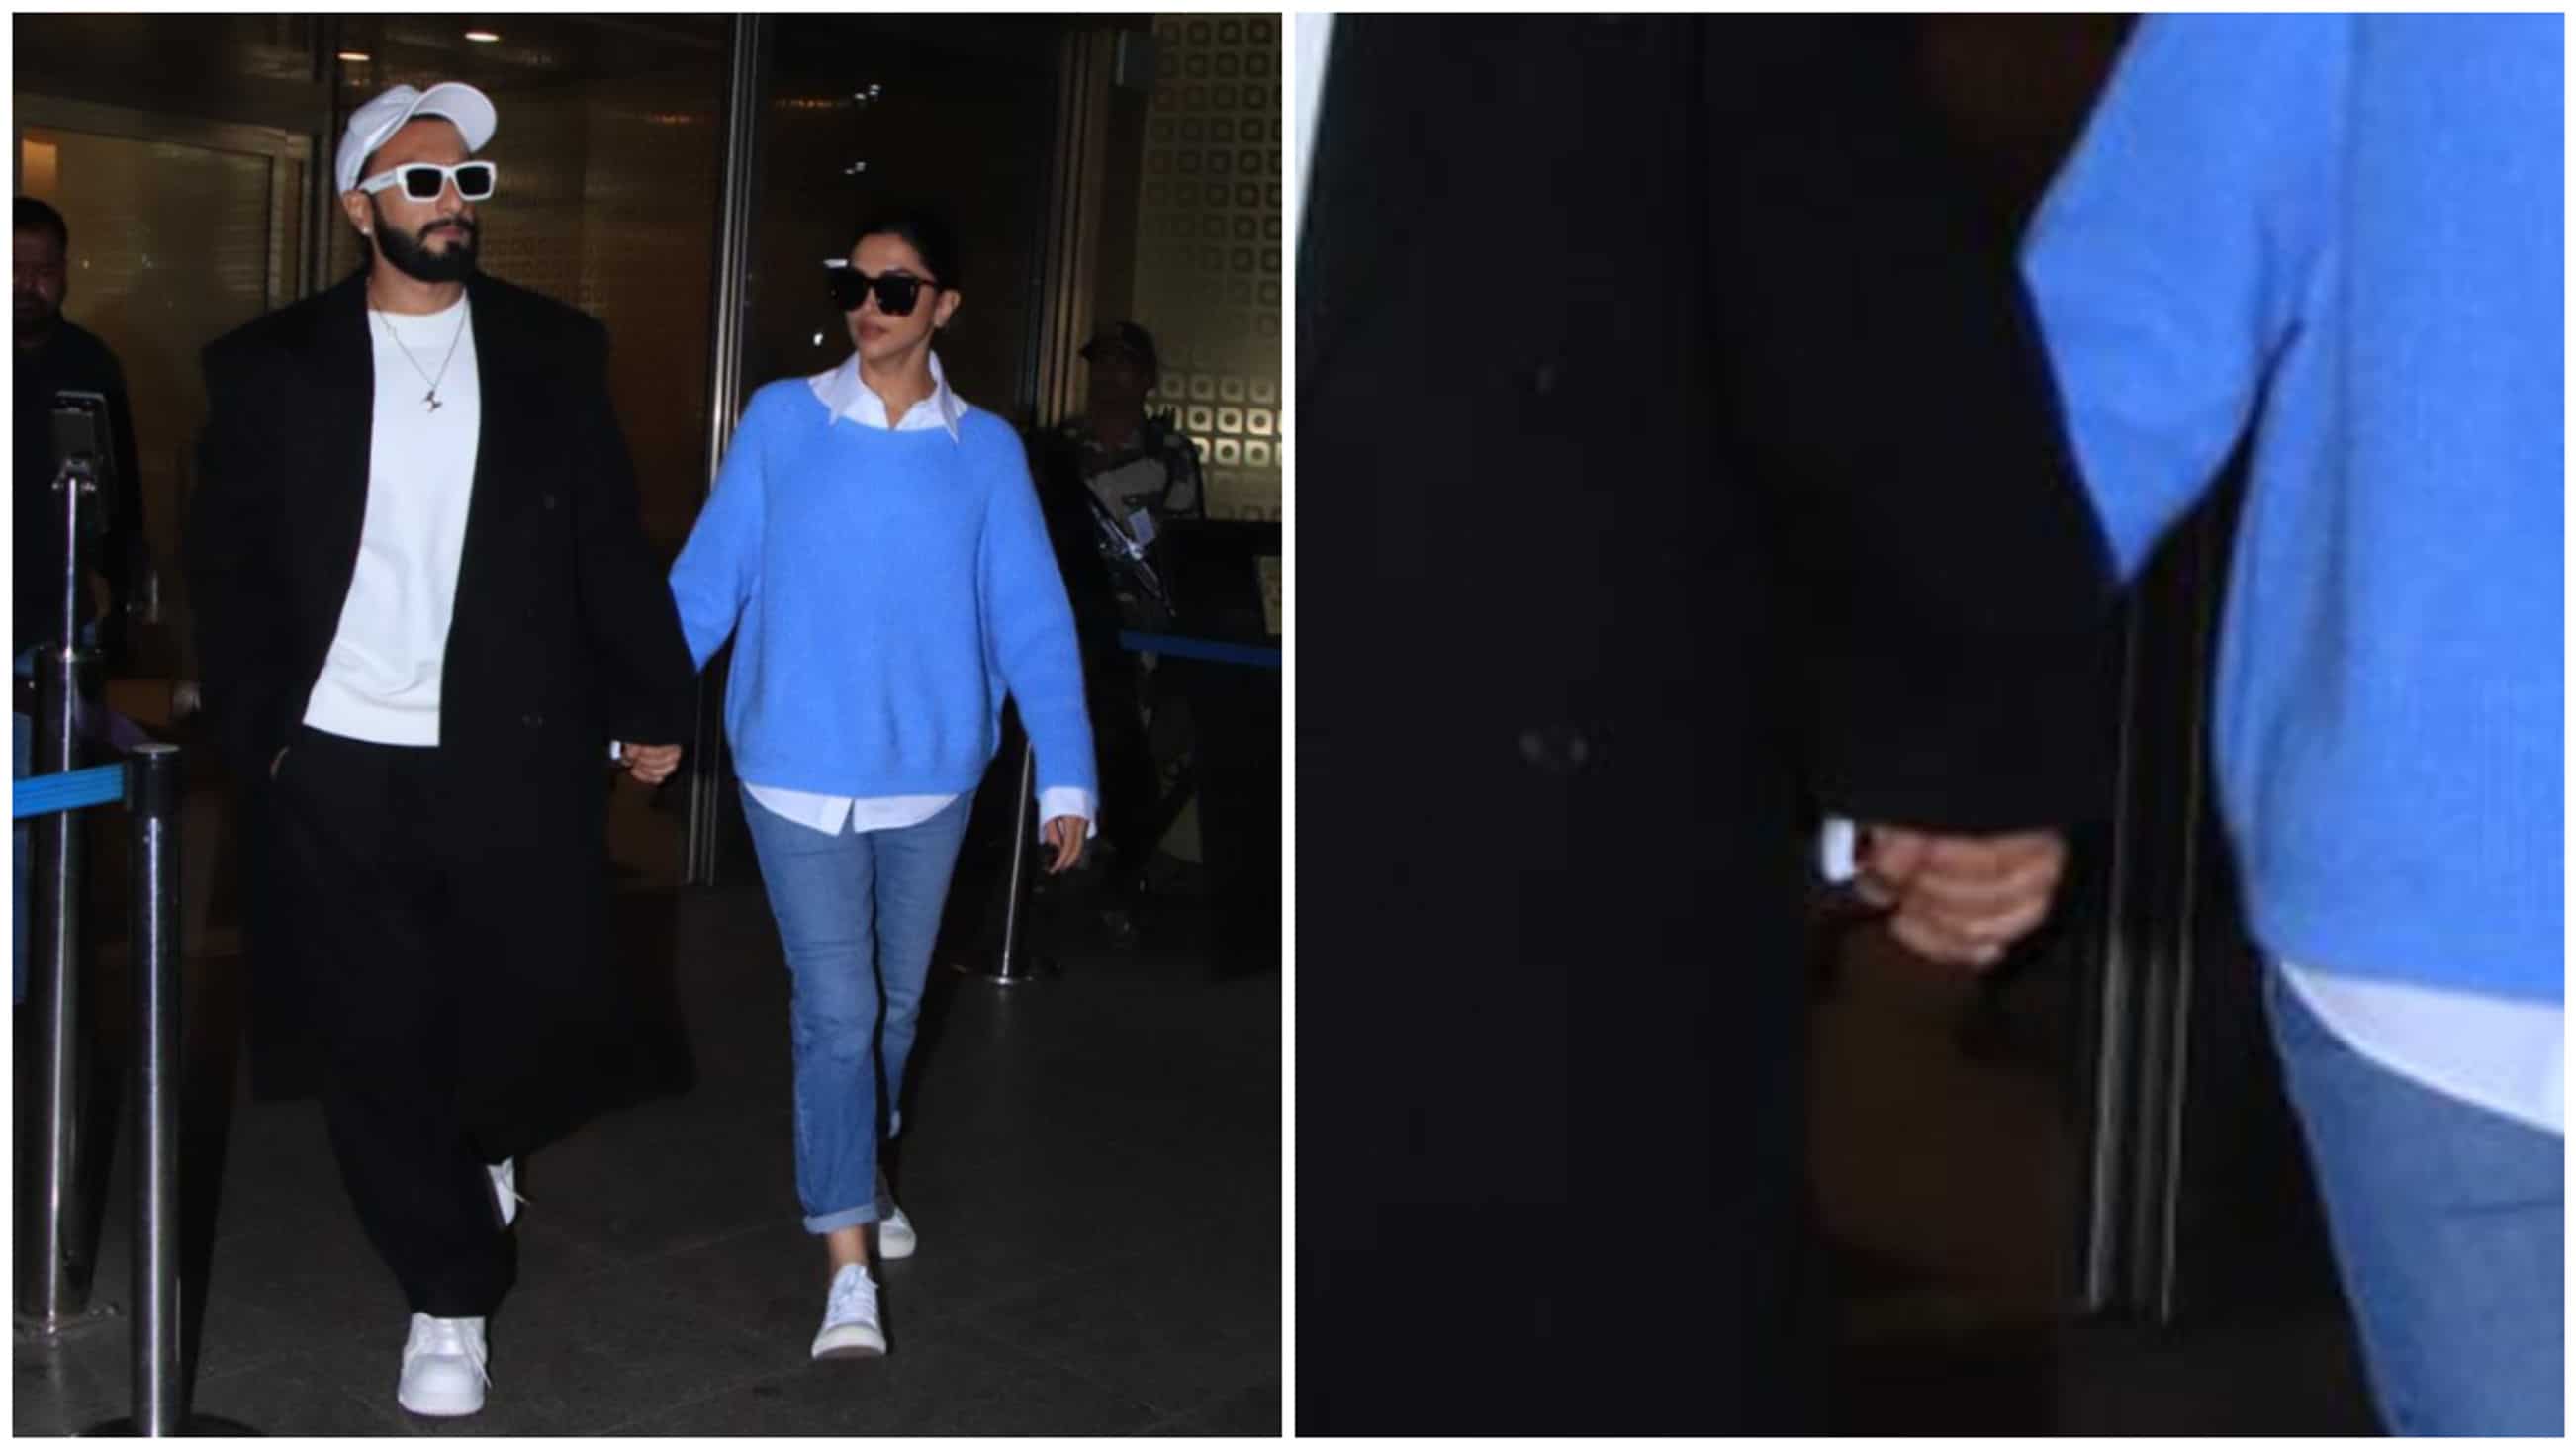 https://www.mobilemasala.com/fashion/Deepika-Padukone-Ranveer-Singh-keep-their-airport-style-on-point-Watch-how-they-greeted-paps-with-grace-i214529